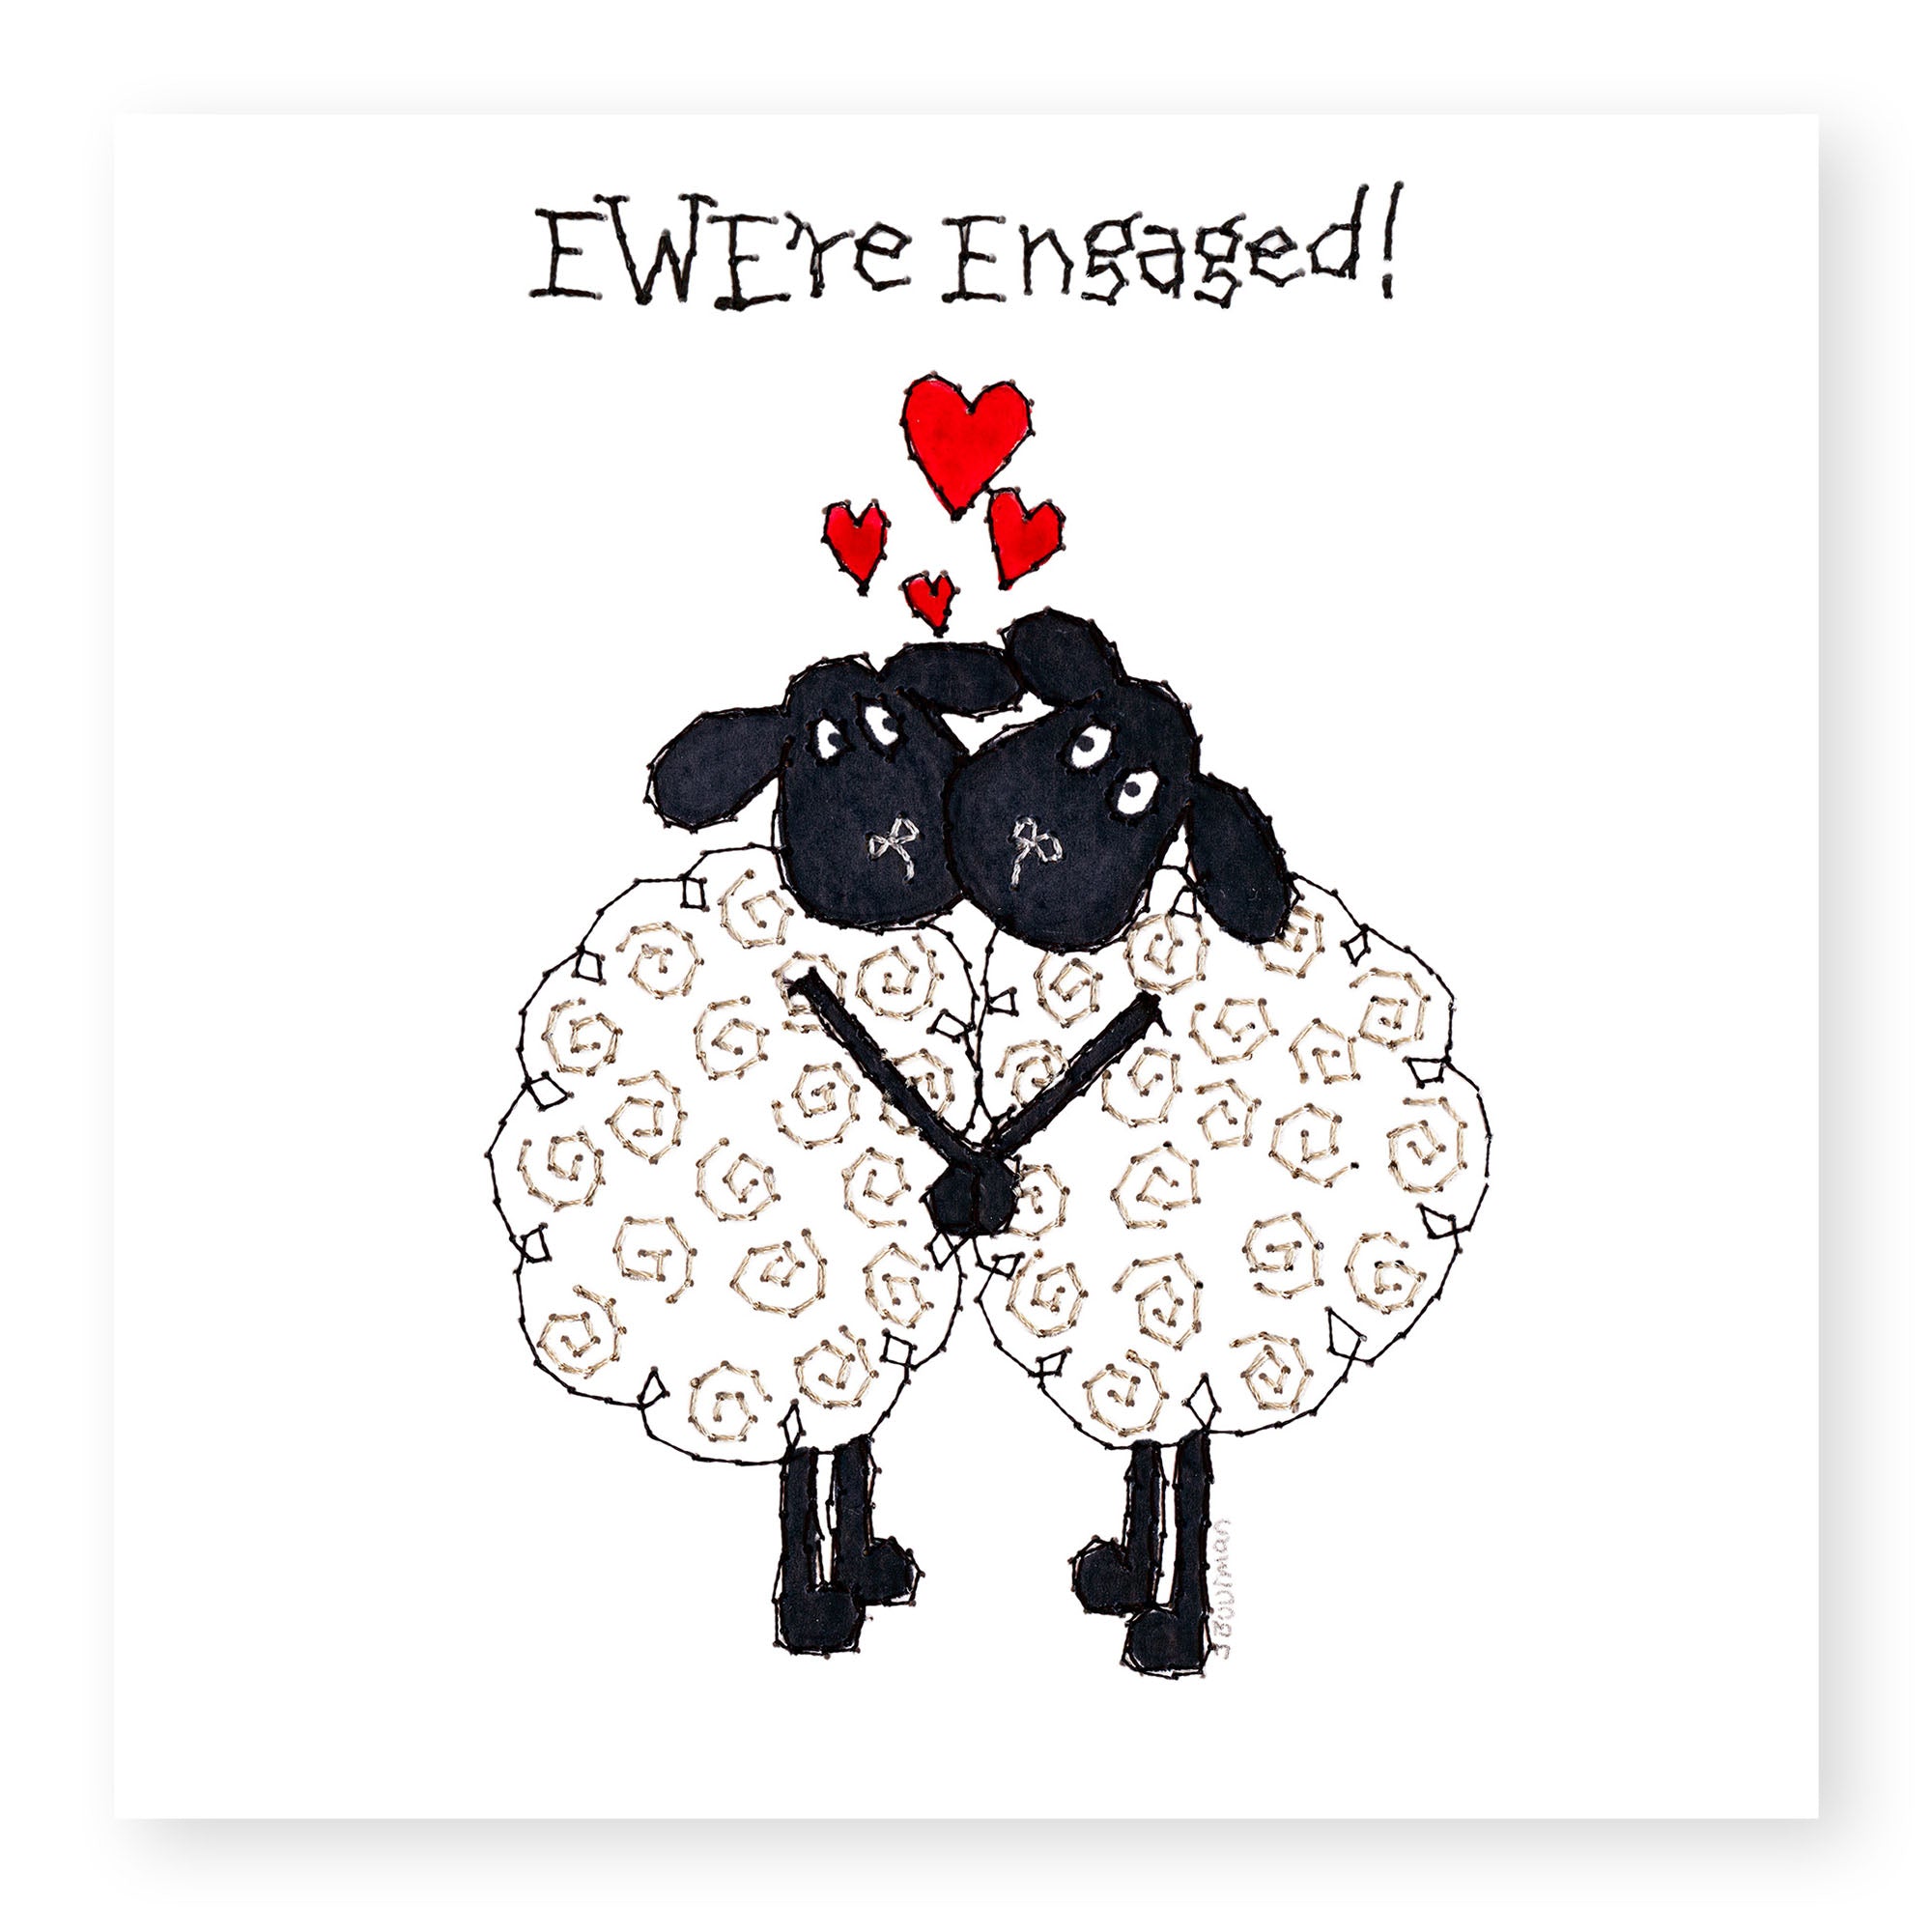 Ewes Hugging Engagement Card from Penny Black